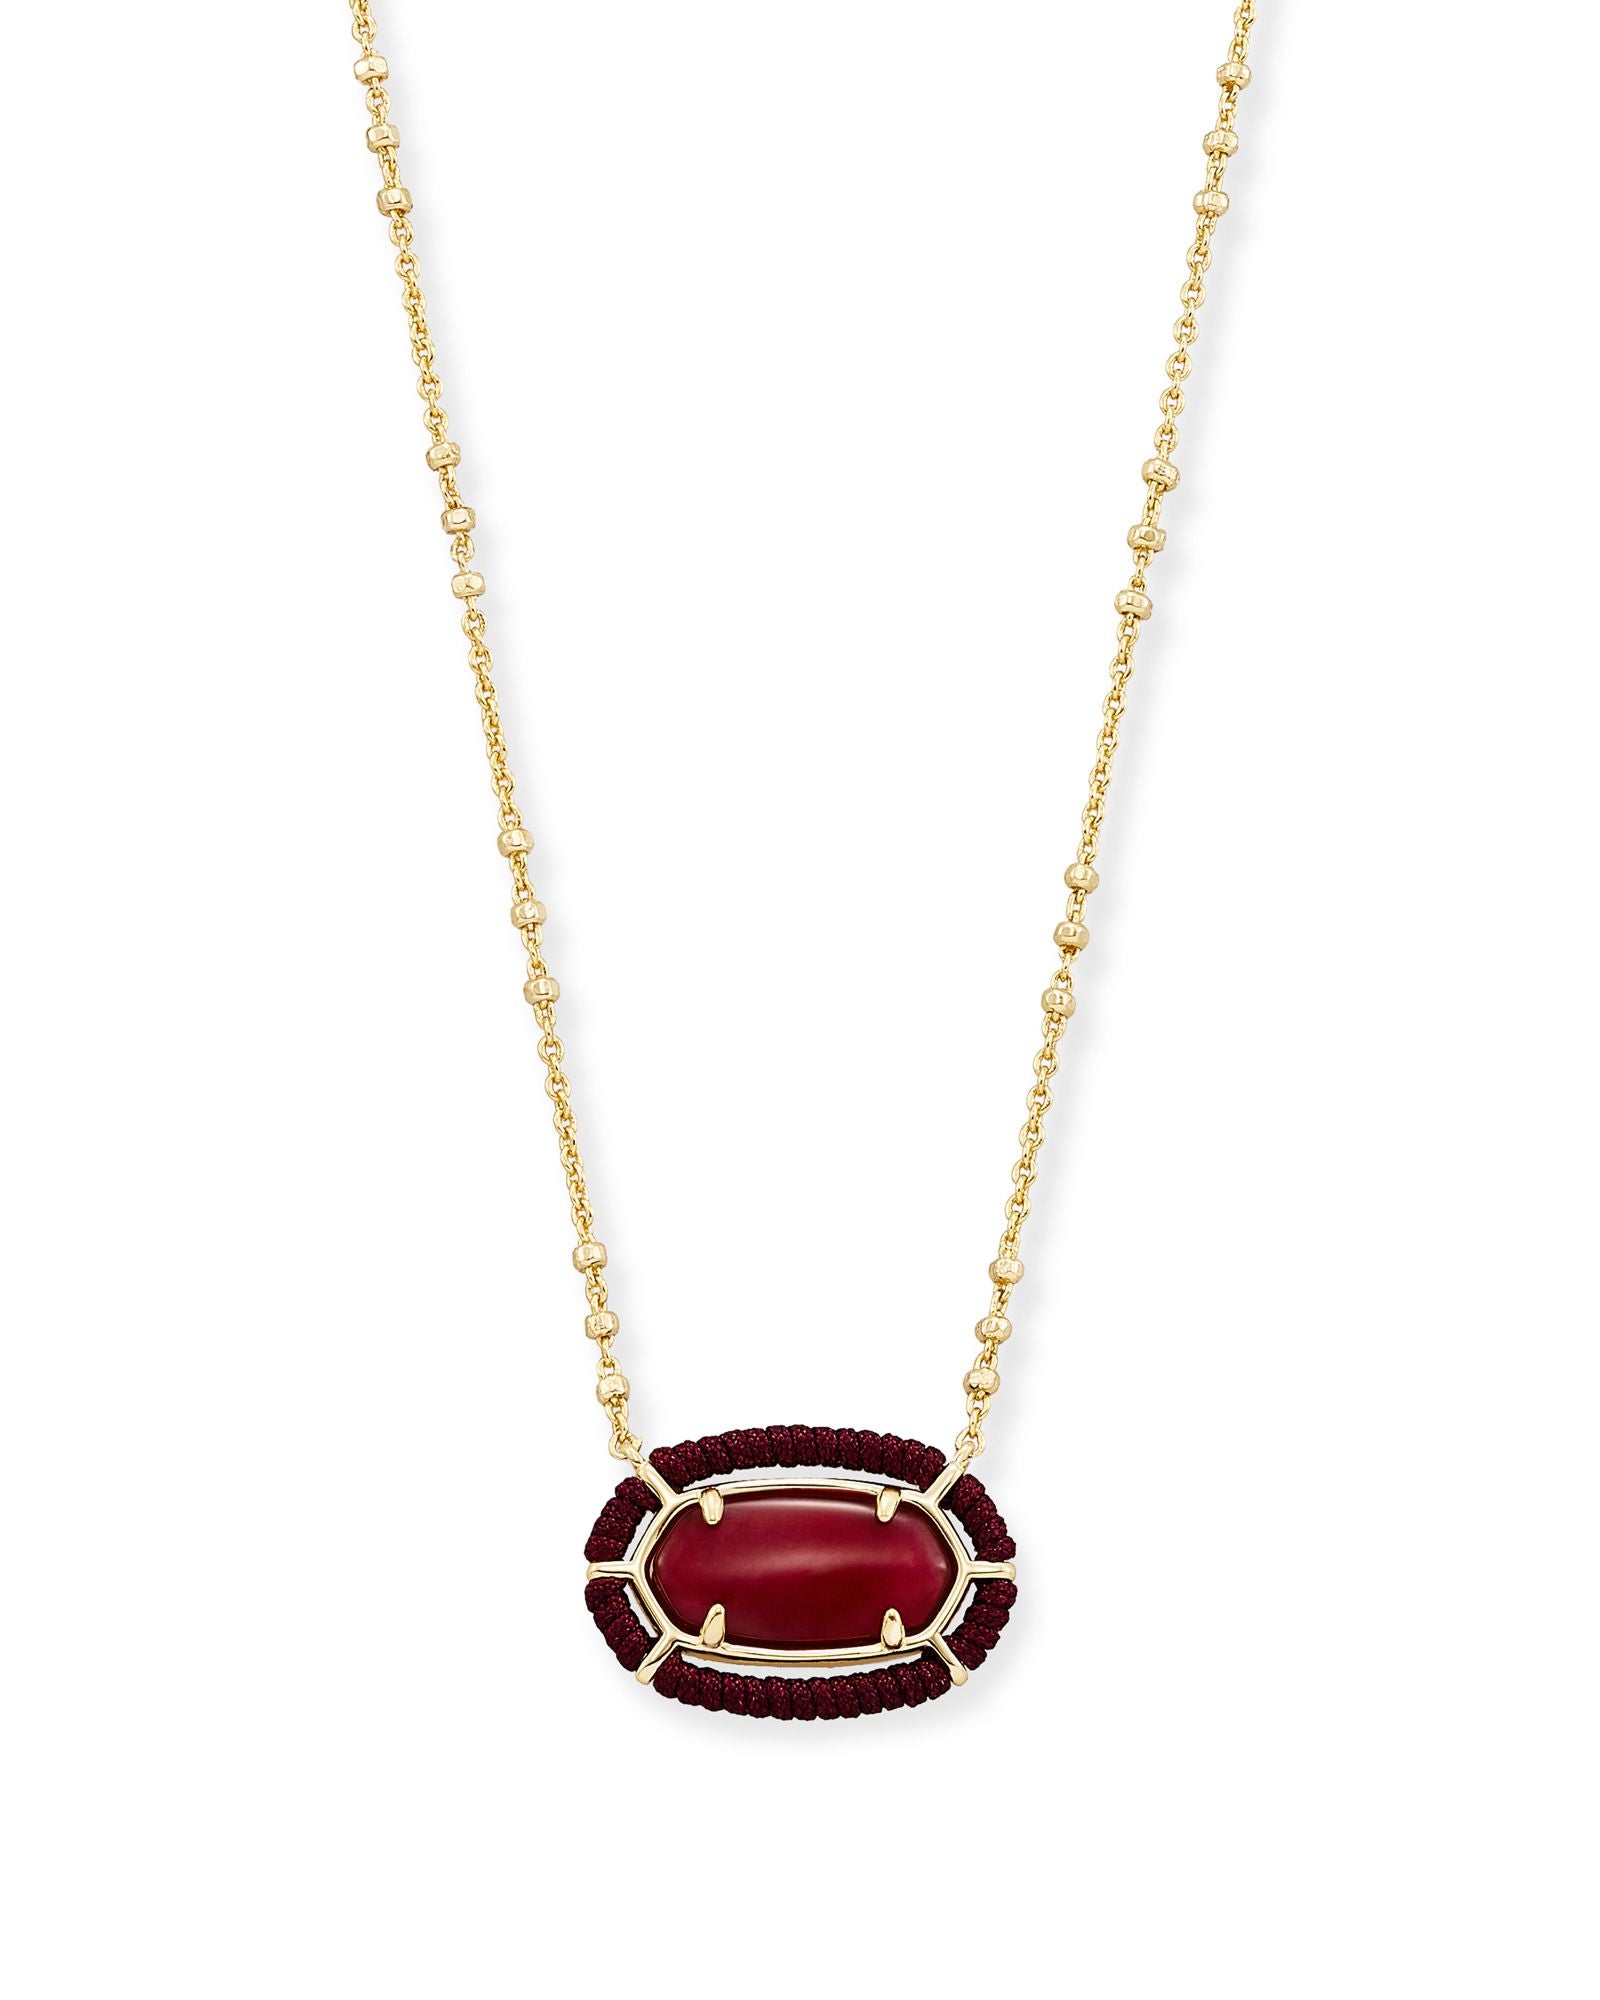 Threaded Elisa Pendant Necklace in Gold Burgundy Illusion